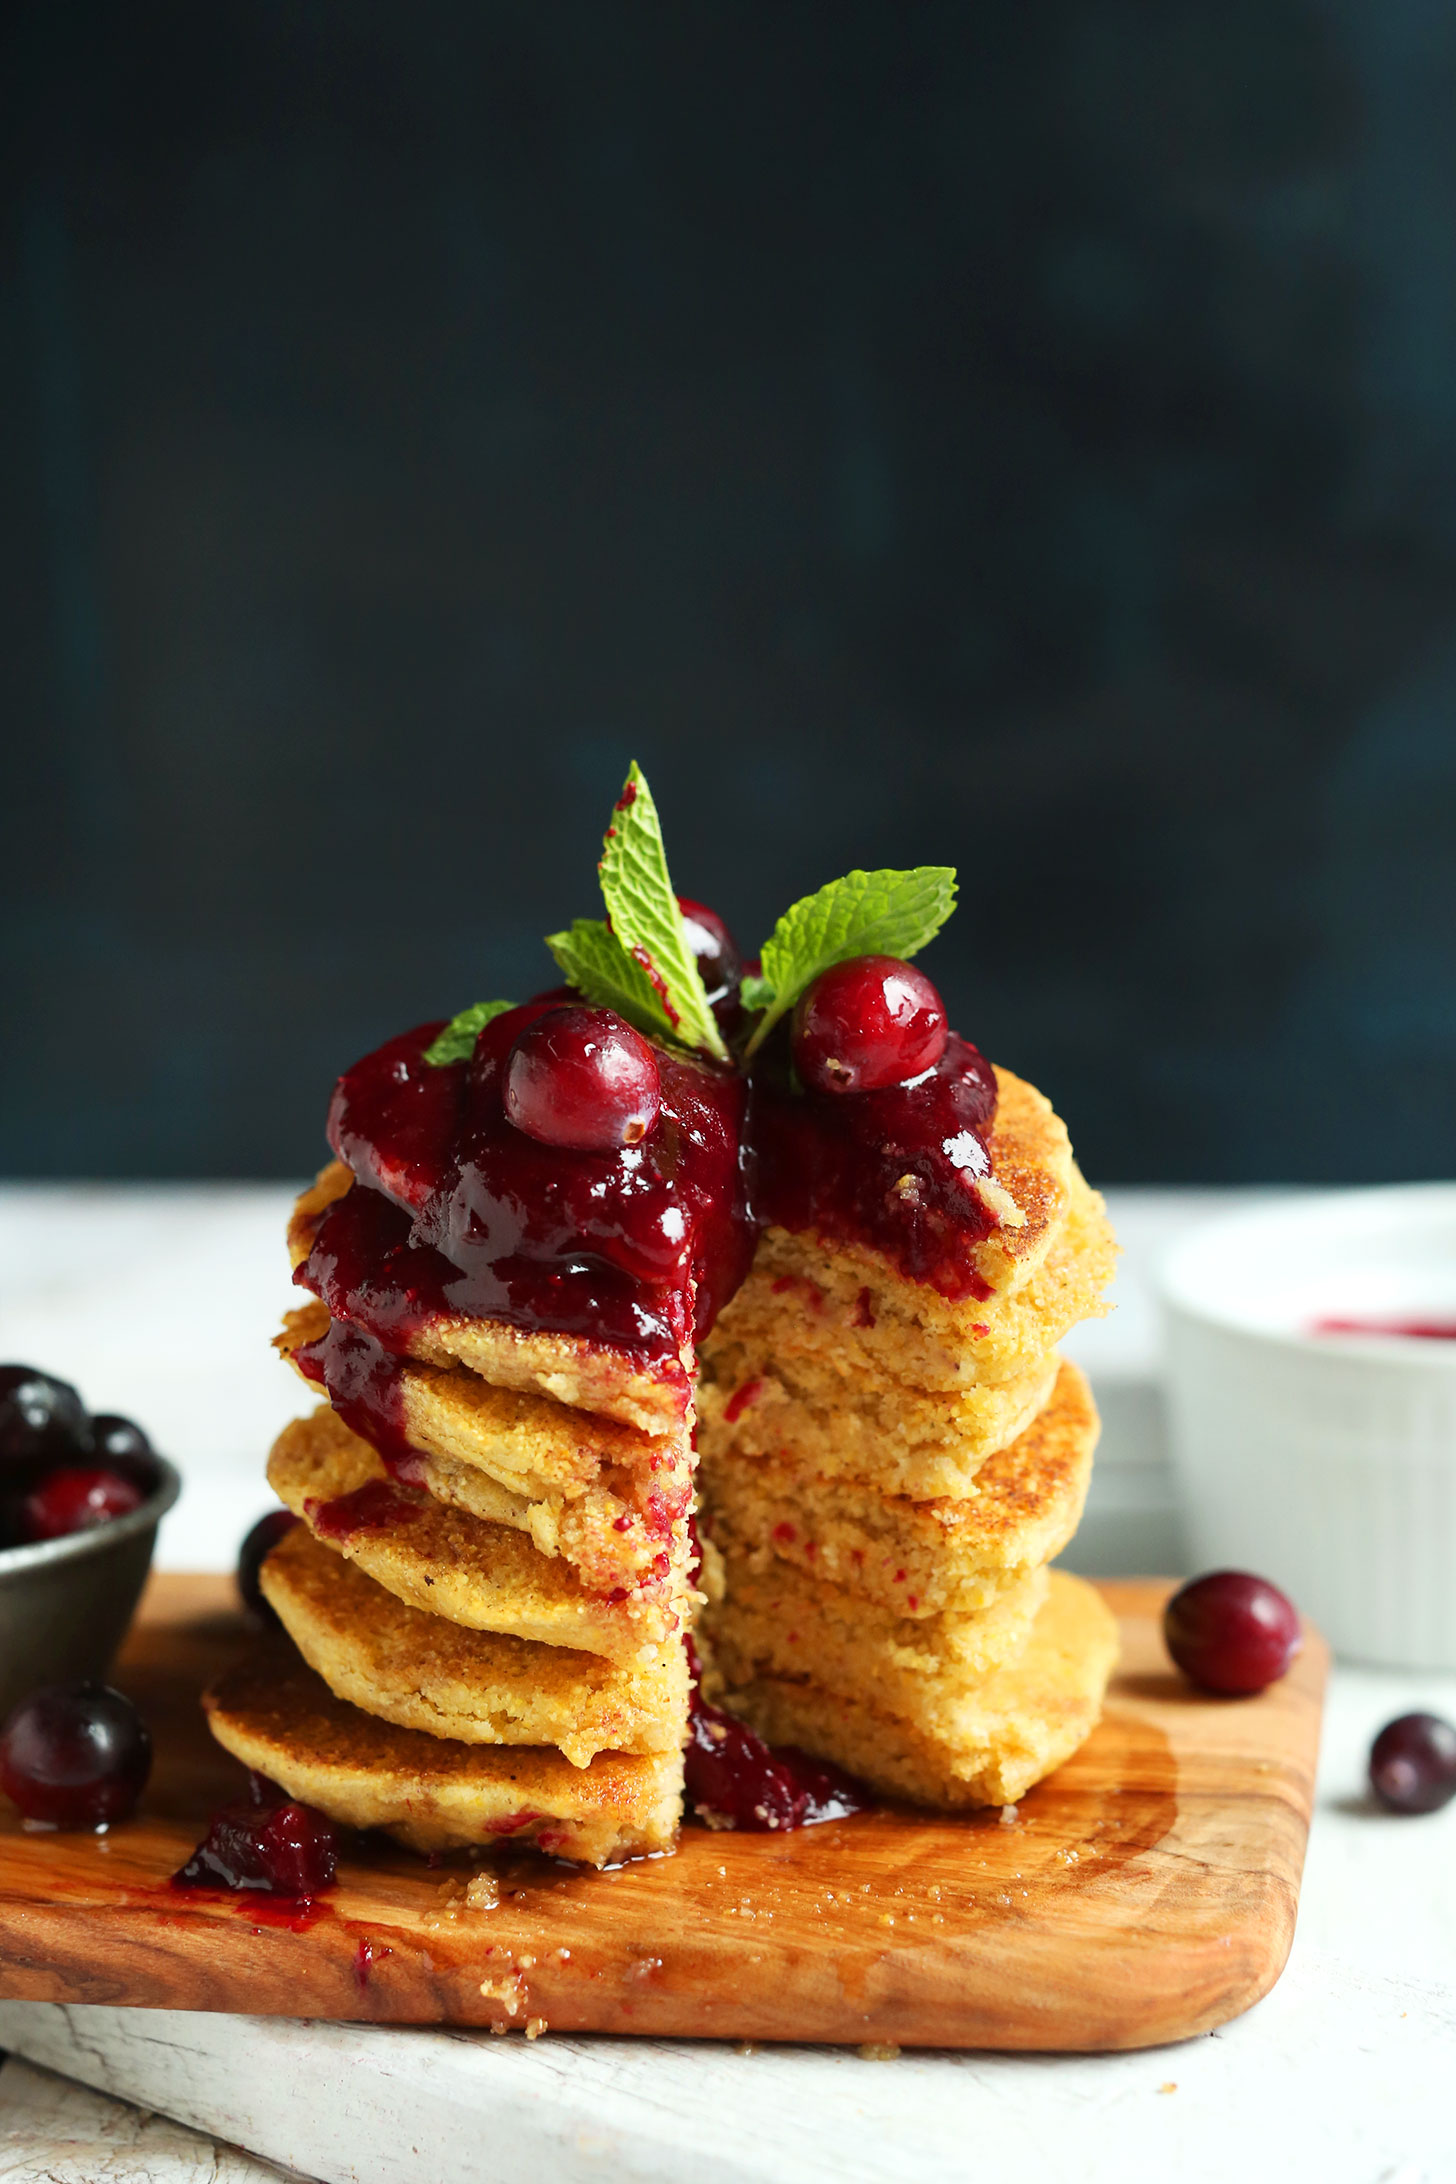 Partially eaten stack of Cornmeal Pancakes with Cranberry Compote for a tasty gluten-free breakfast